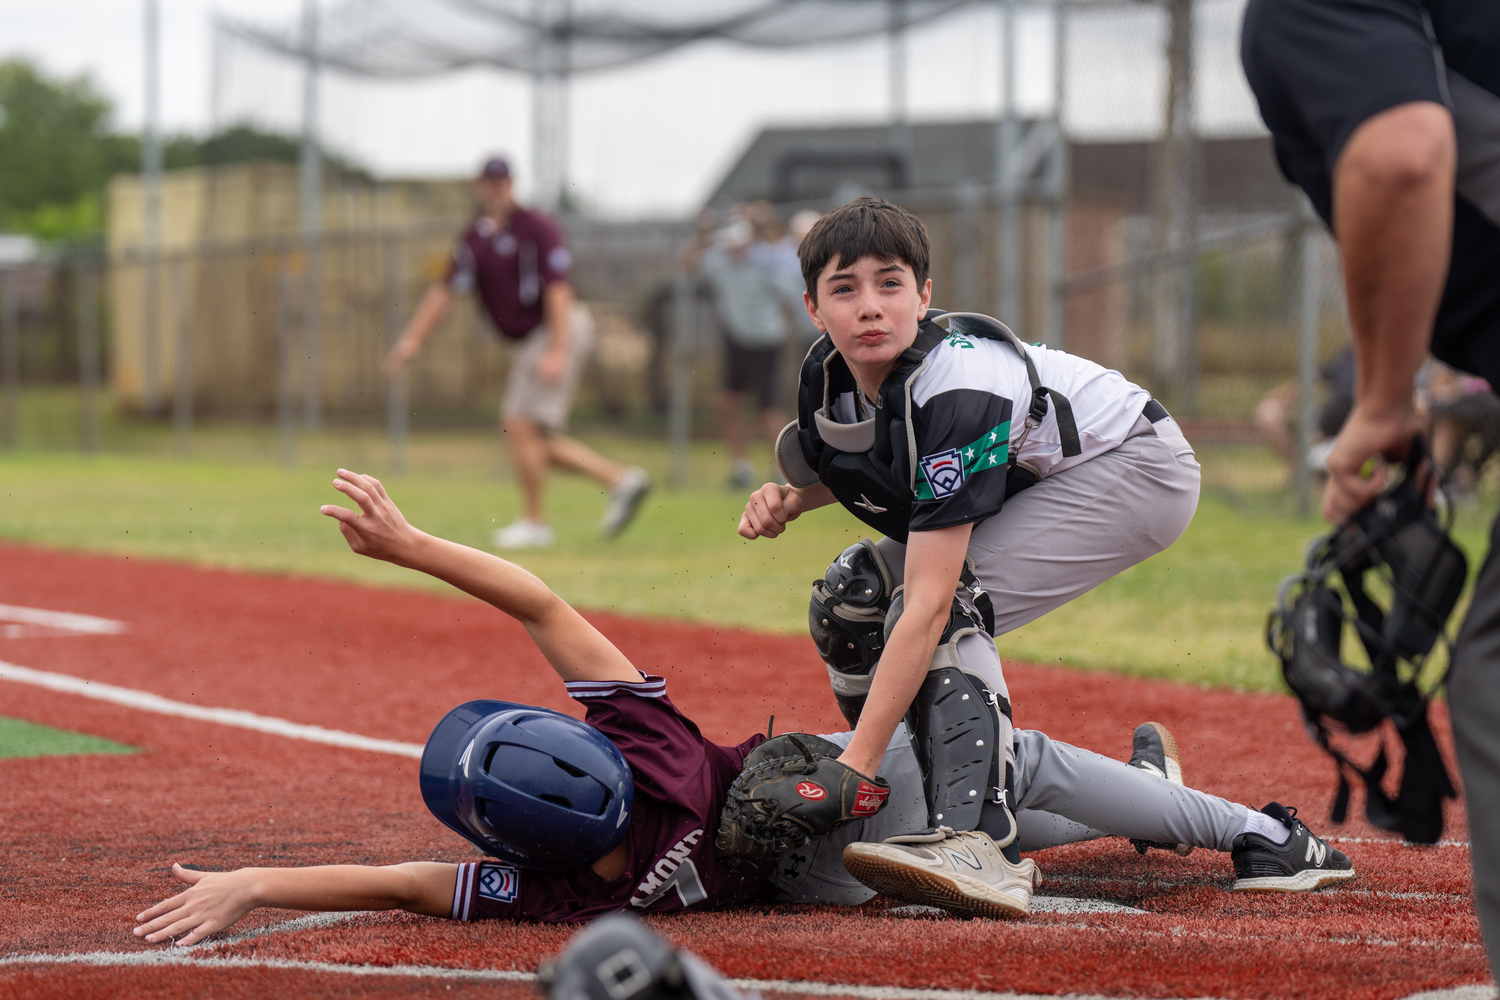 East End catcher Gabe Dawson applies a tag to an East Hampton base runner trying to score.   RON ESPOSITO